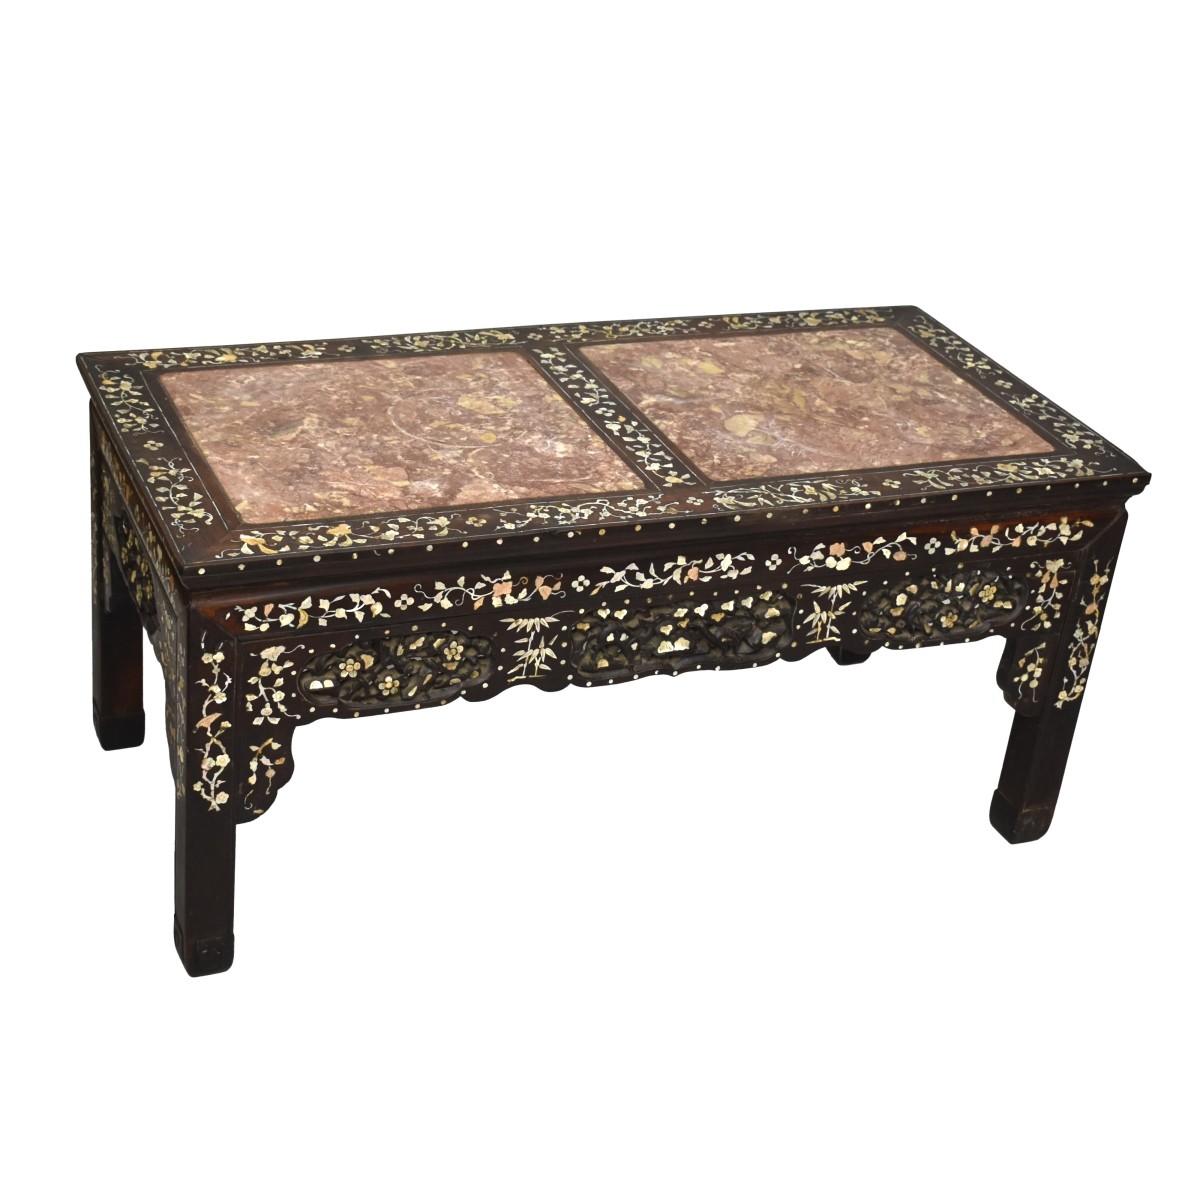 Antique Chinese MOP Inlaid Marble Top Coffee Table